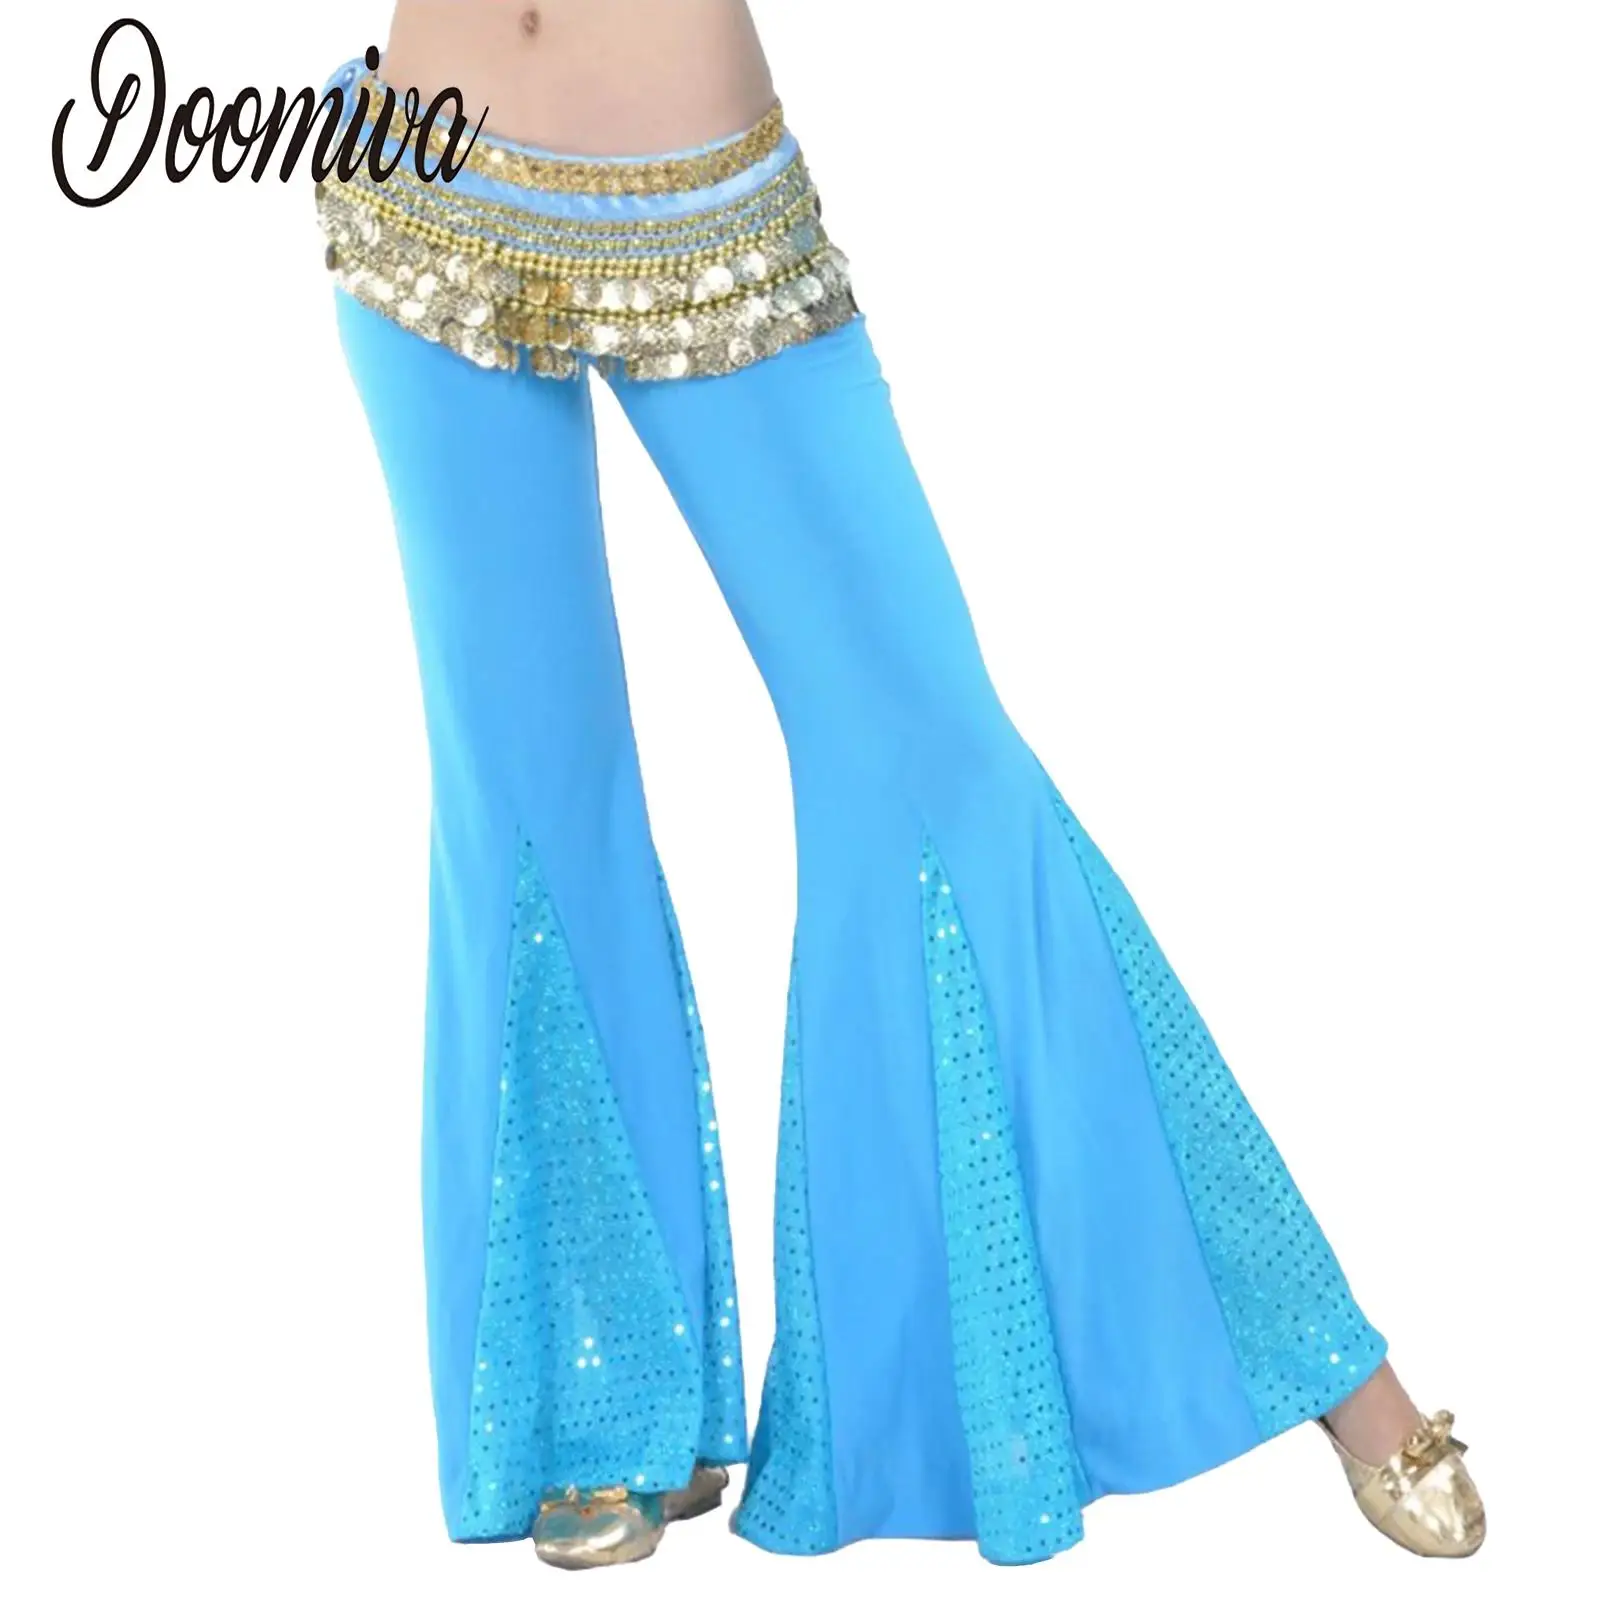 

Women Belly Dance Costume Indian Dance Pants Bottoms Ladies Low Rise Bell-Bottoms Flared Trousers Dance Clothes Bellydance Wear